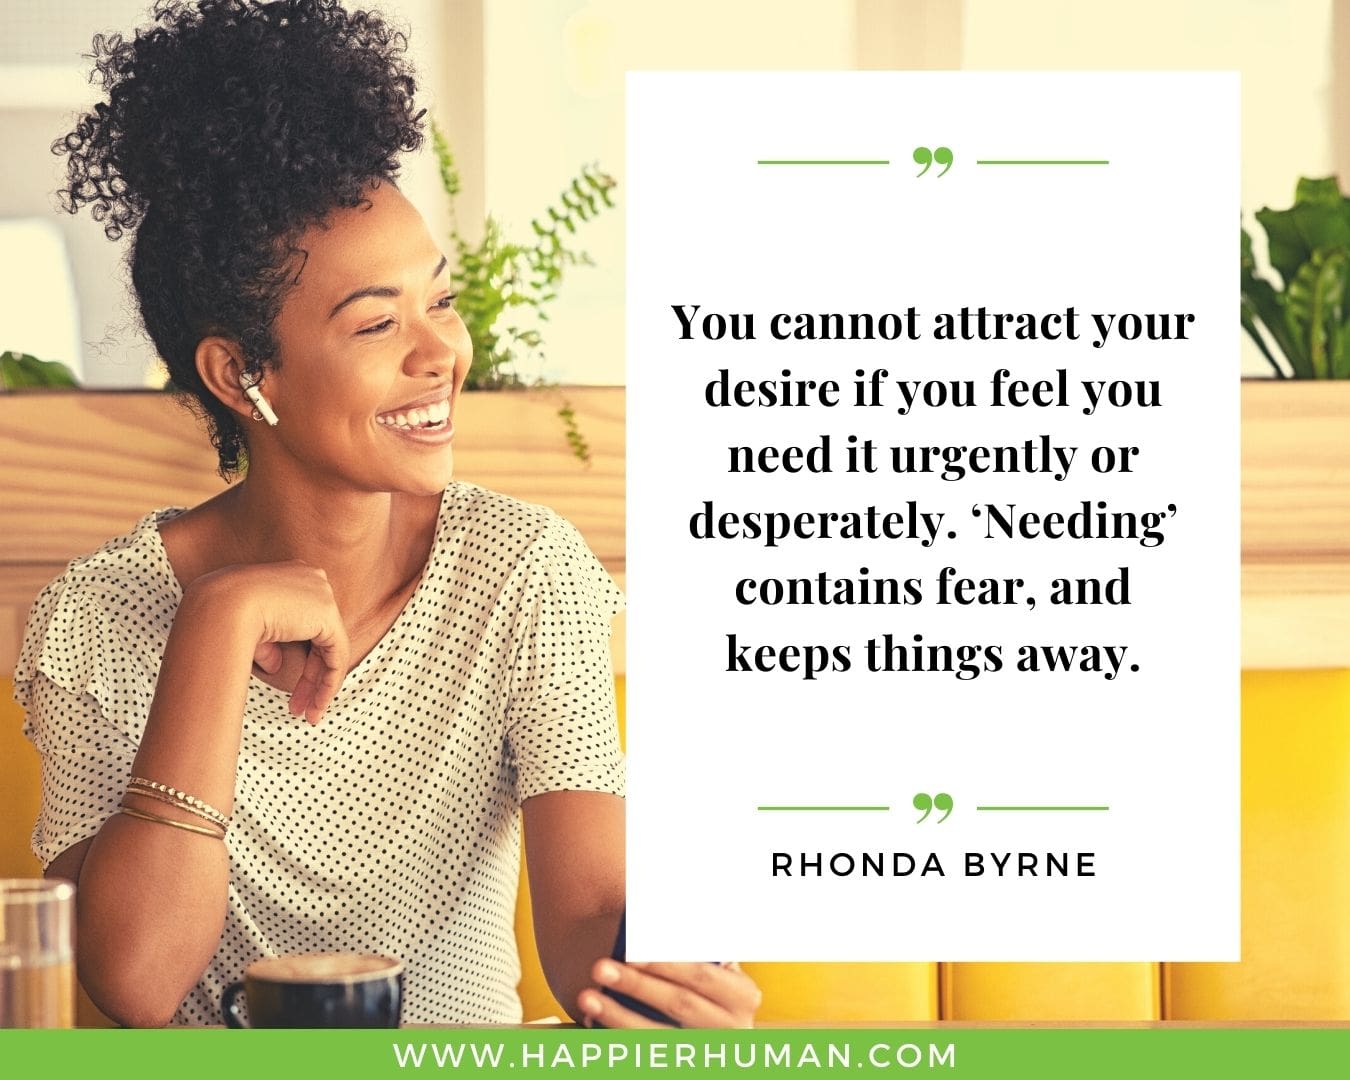 Positive Energy Quotes - “You cannot attract your desire if you feel you need it urgently or desperately. ‘Needing’ contains fear, and keeps things away.” - Rhonda Byrne